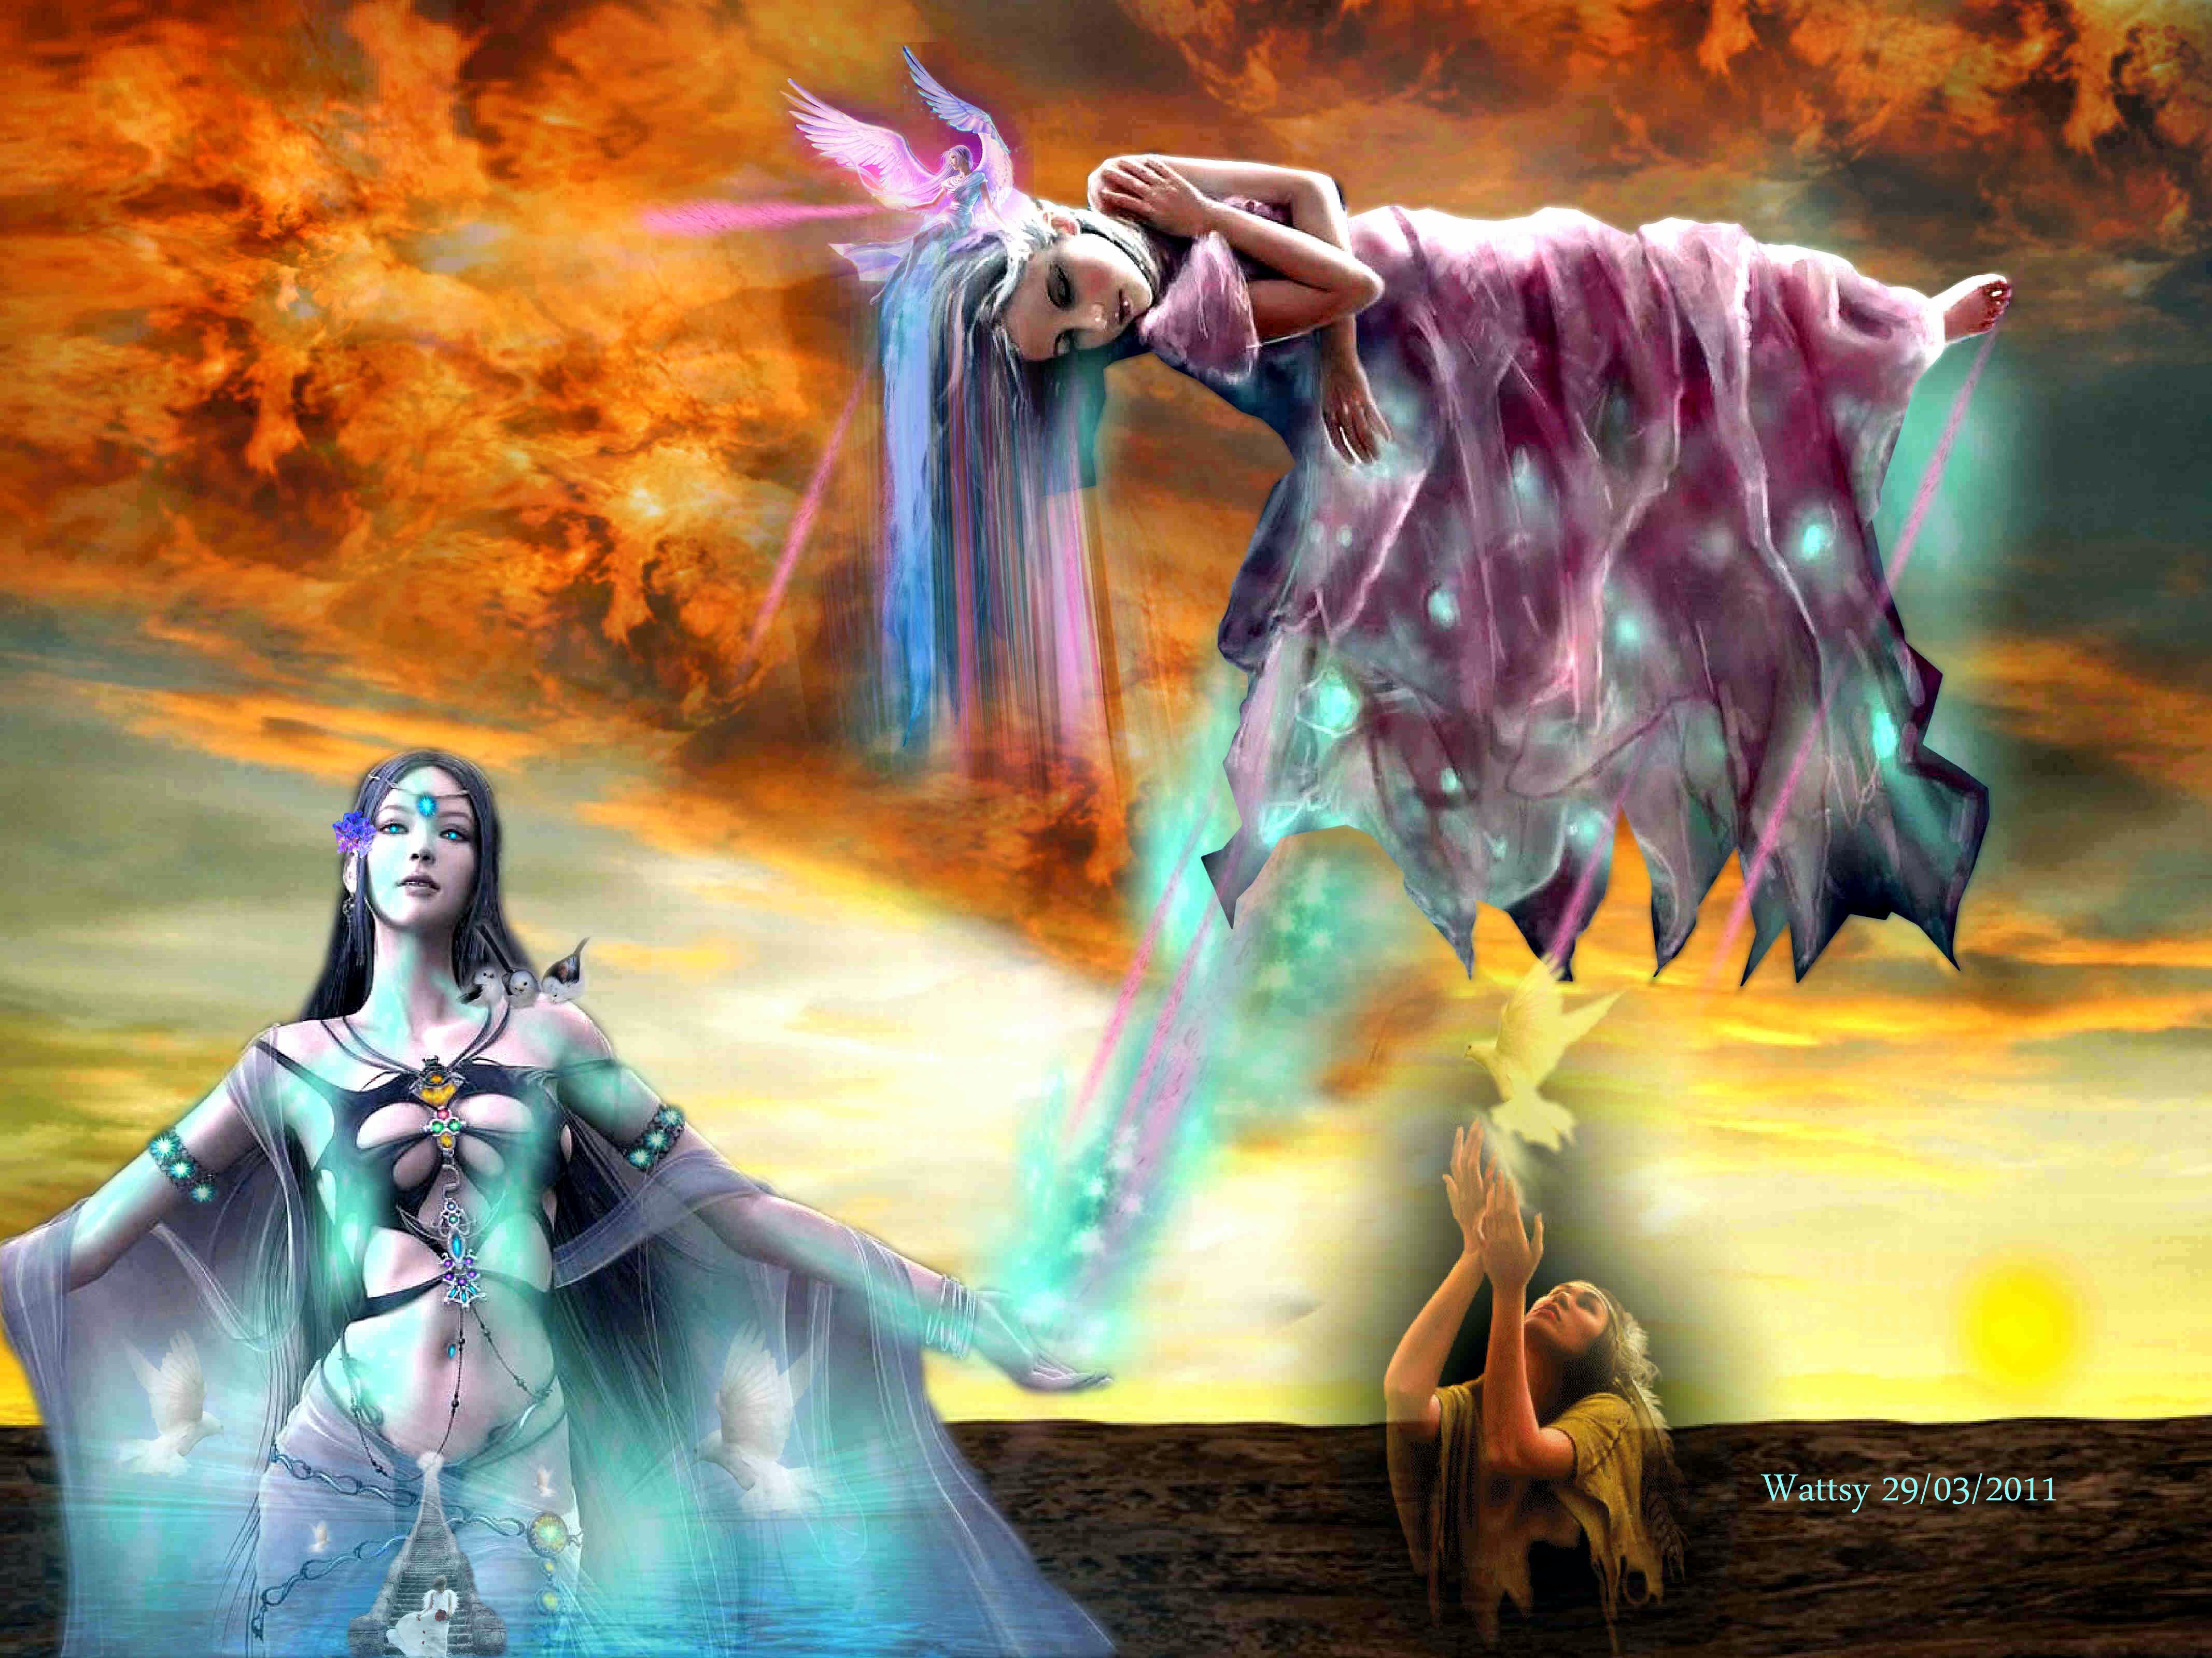 Artistic fantasy with a dove engulfed in colorful fire.